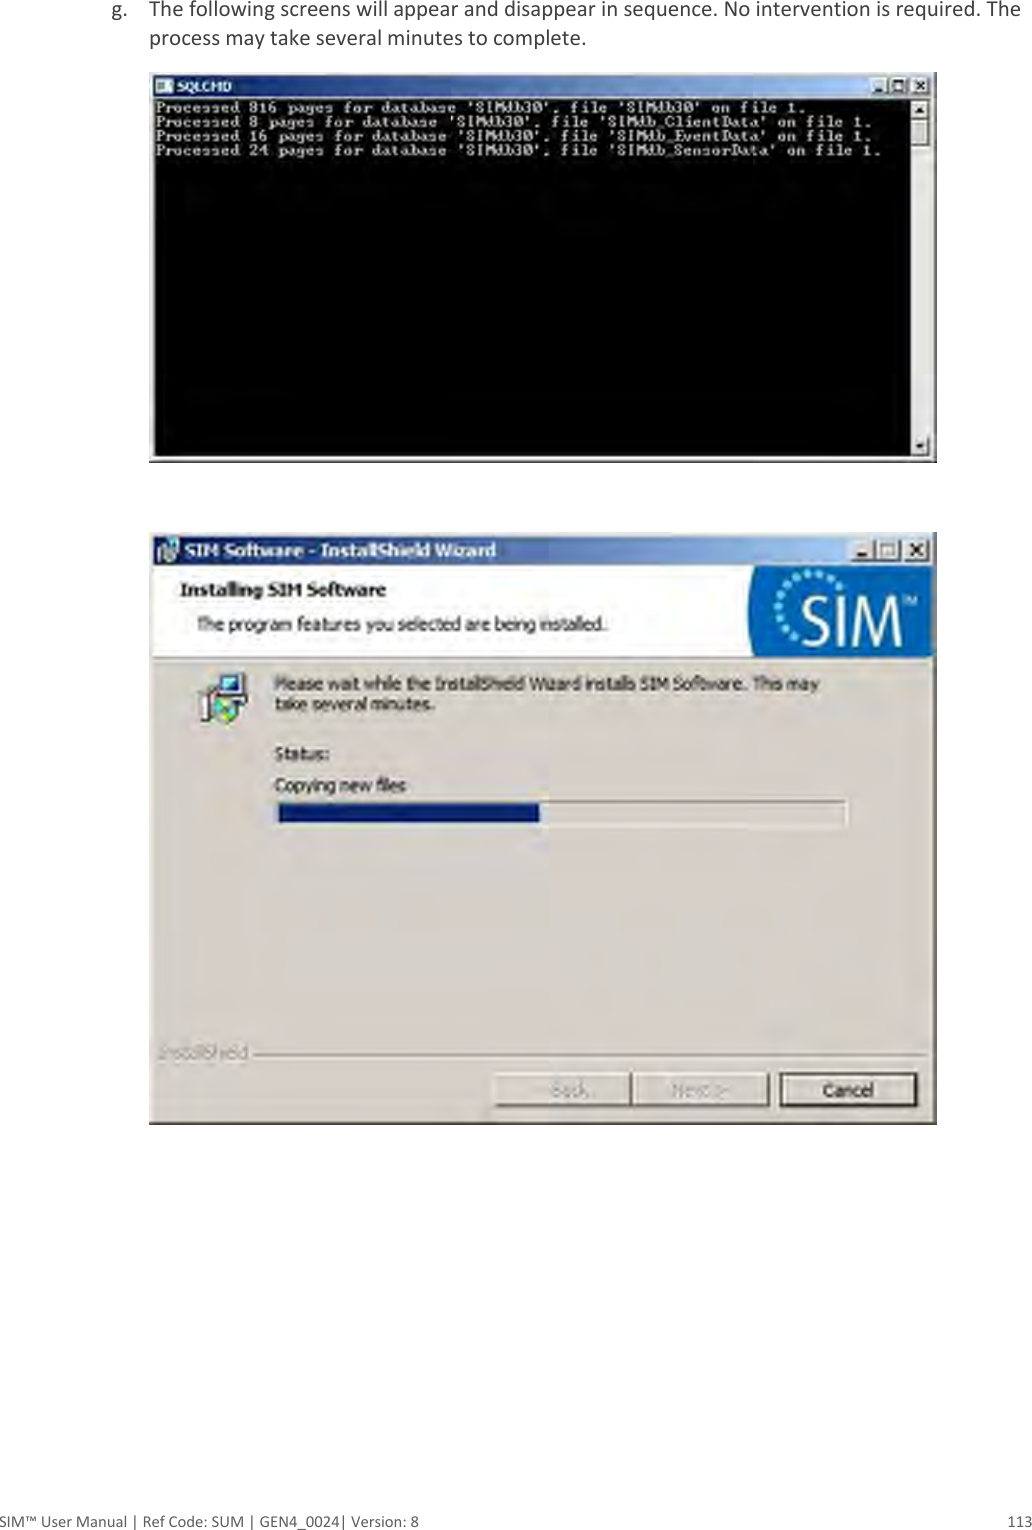  SIM™ User Manual | Ref Code: SUM | GEN4_0024| Version: 8  113  g. The following screens will appear and disappear in sequence. No intervention is required. The process may take several minutes to complete.    